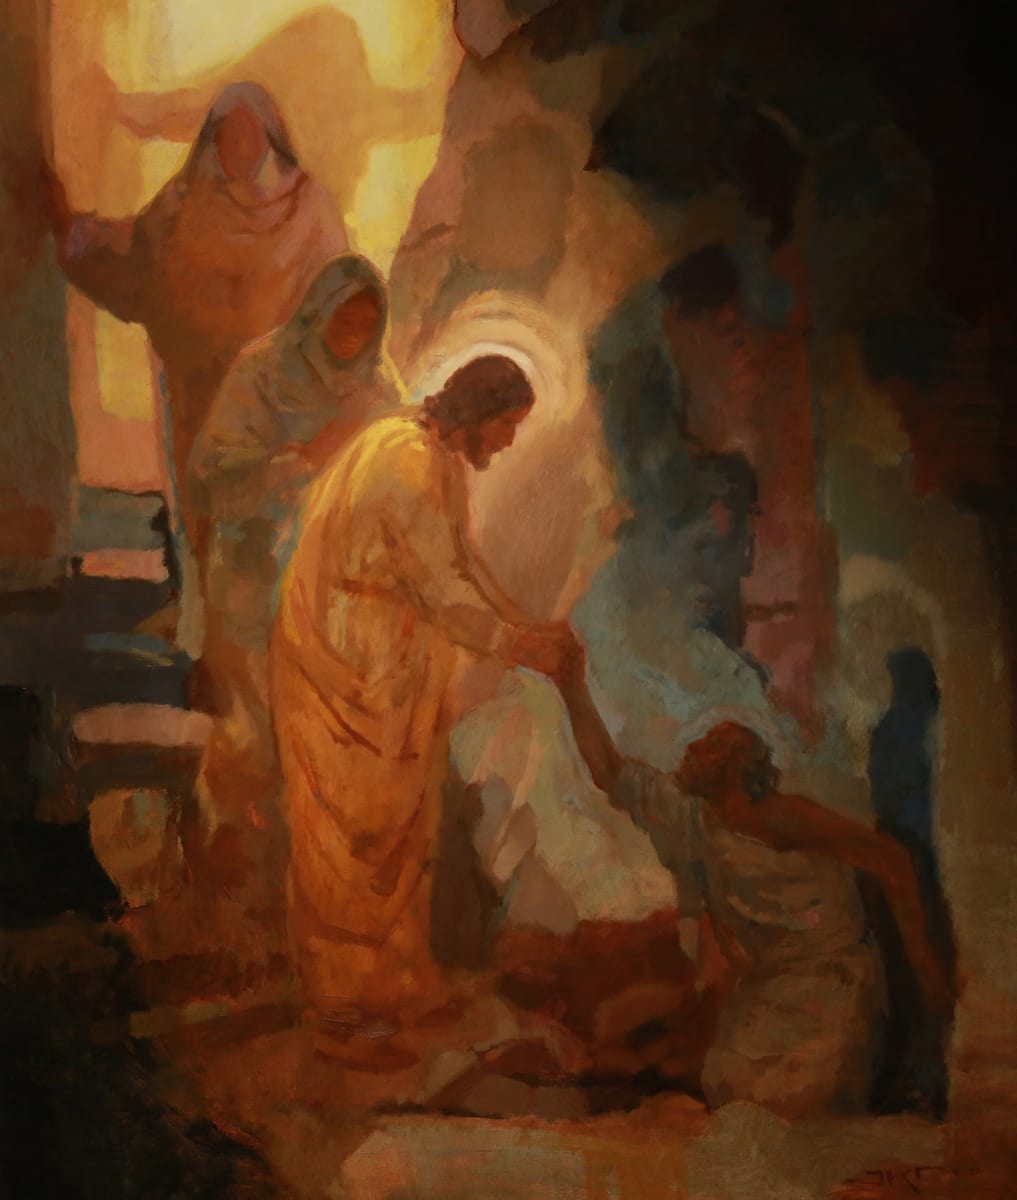 Raising of Lazarus by J. Kirk Richards  Image: "And when he thus had spoken, he cried with a loud voice, Lazarus, come forth." --John 11: 43 KJV
